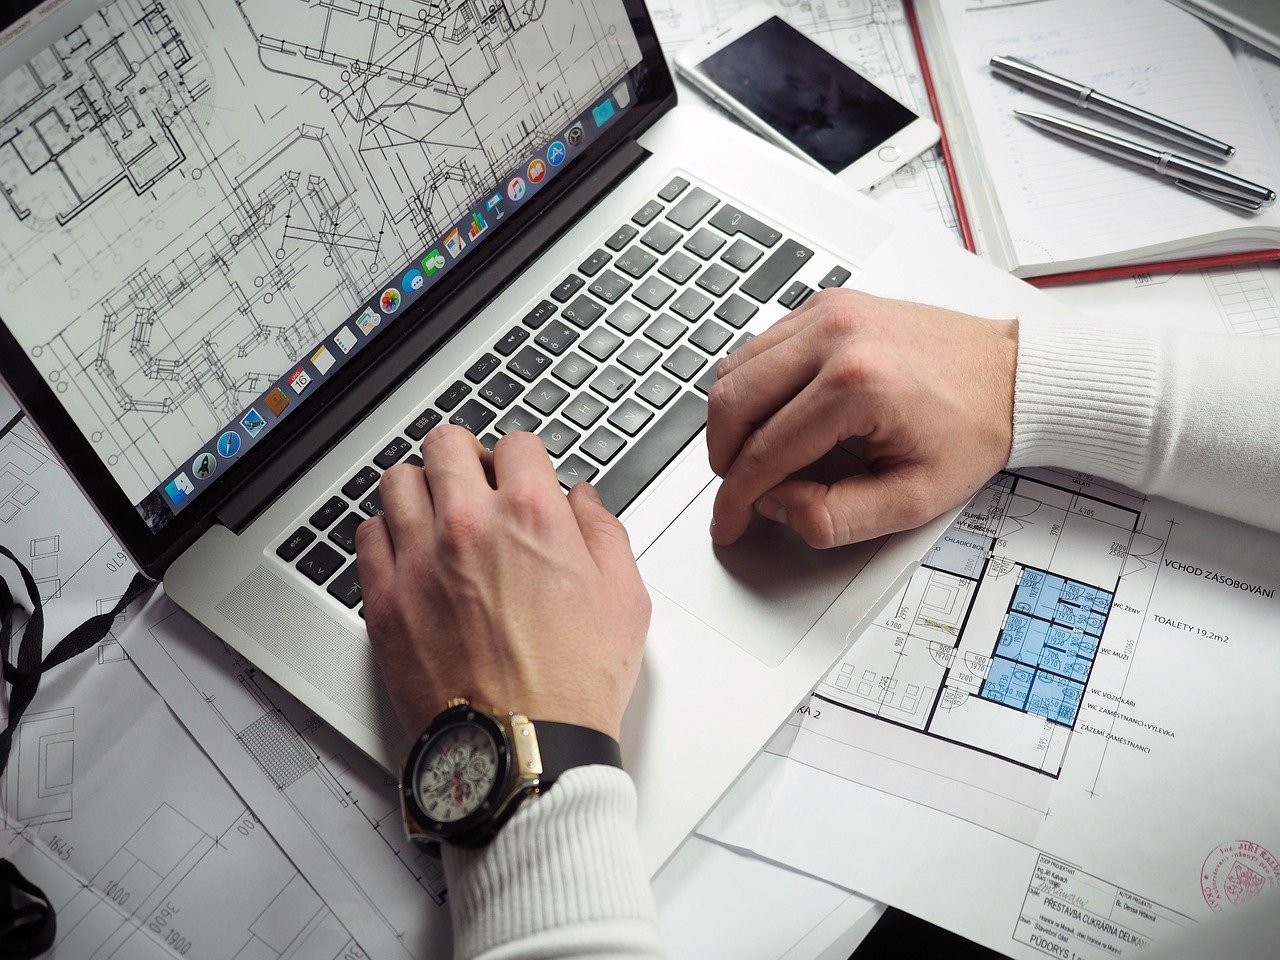 Man in cardigan works on architectural plans on laptop